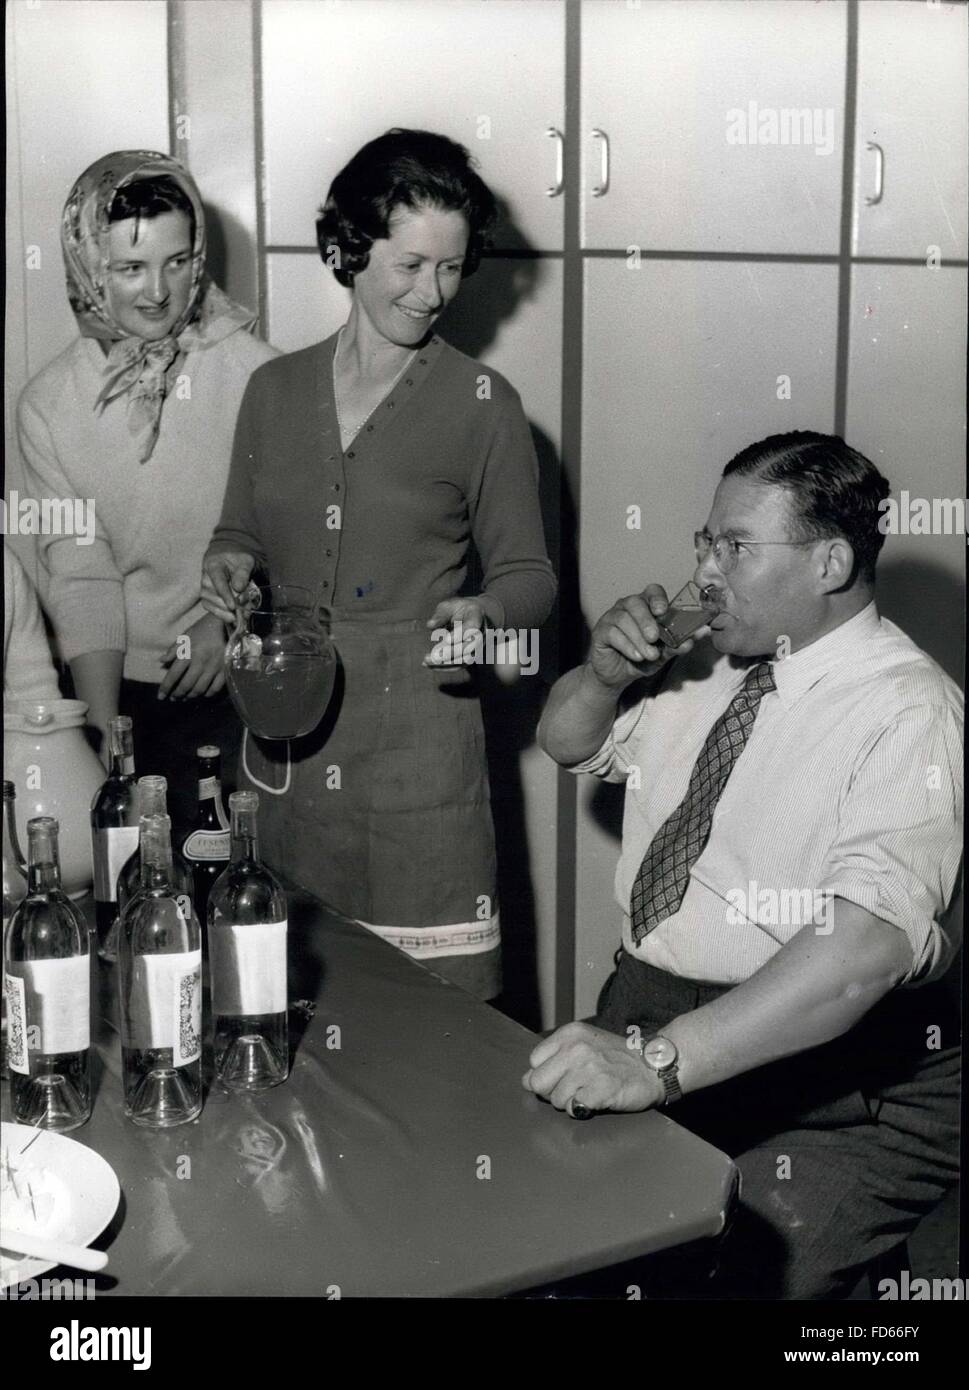 1958 - The Taste Of Things To Come: Sir Bernard Waley-Cohen Decides The Liquid Refreshment Before A Junior Hunt Ball To Be Held At His Home On Exmoor: Sir Bernard is a man of a many parts and accomplishments. At his home, he is ''off-duty'' and insists on seeing domestic arrangements for a social function are properly handled - even to getting down to wine testing, using his experience and knowledge on behalf of the Ball Committee. Watching her father on the left is Joanna. Wearing a headscarf is Miss Elizabeth Matson, daughter of the Joint Master of Sir Watkin William Wyn's Hunt, and next to  Stock Photo